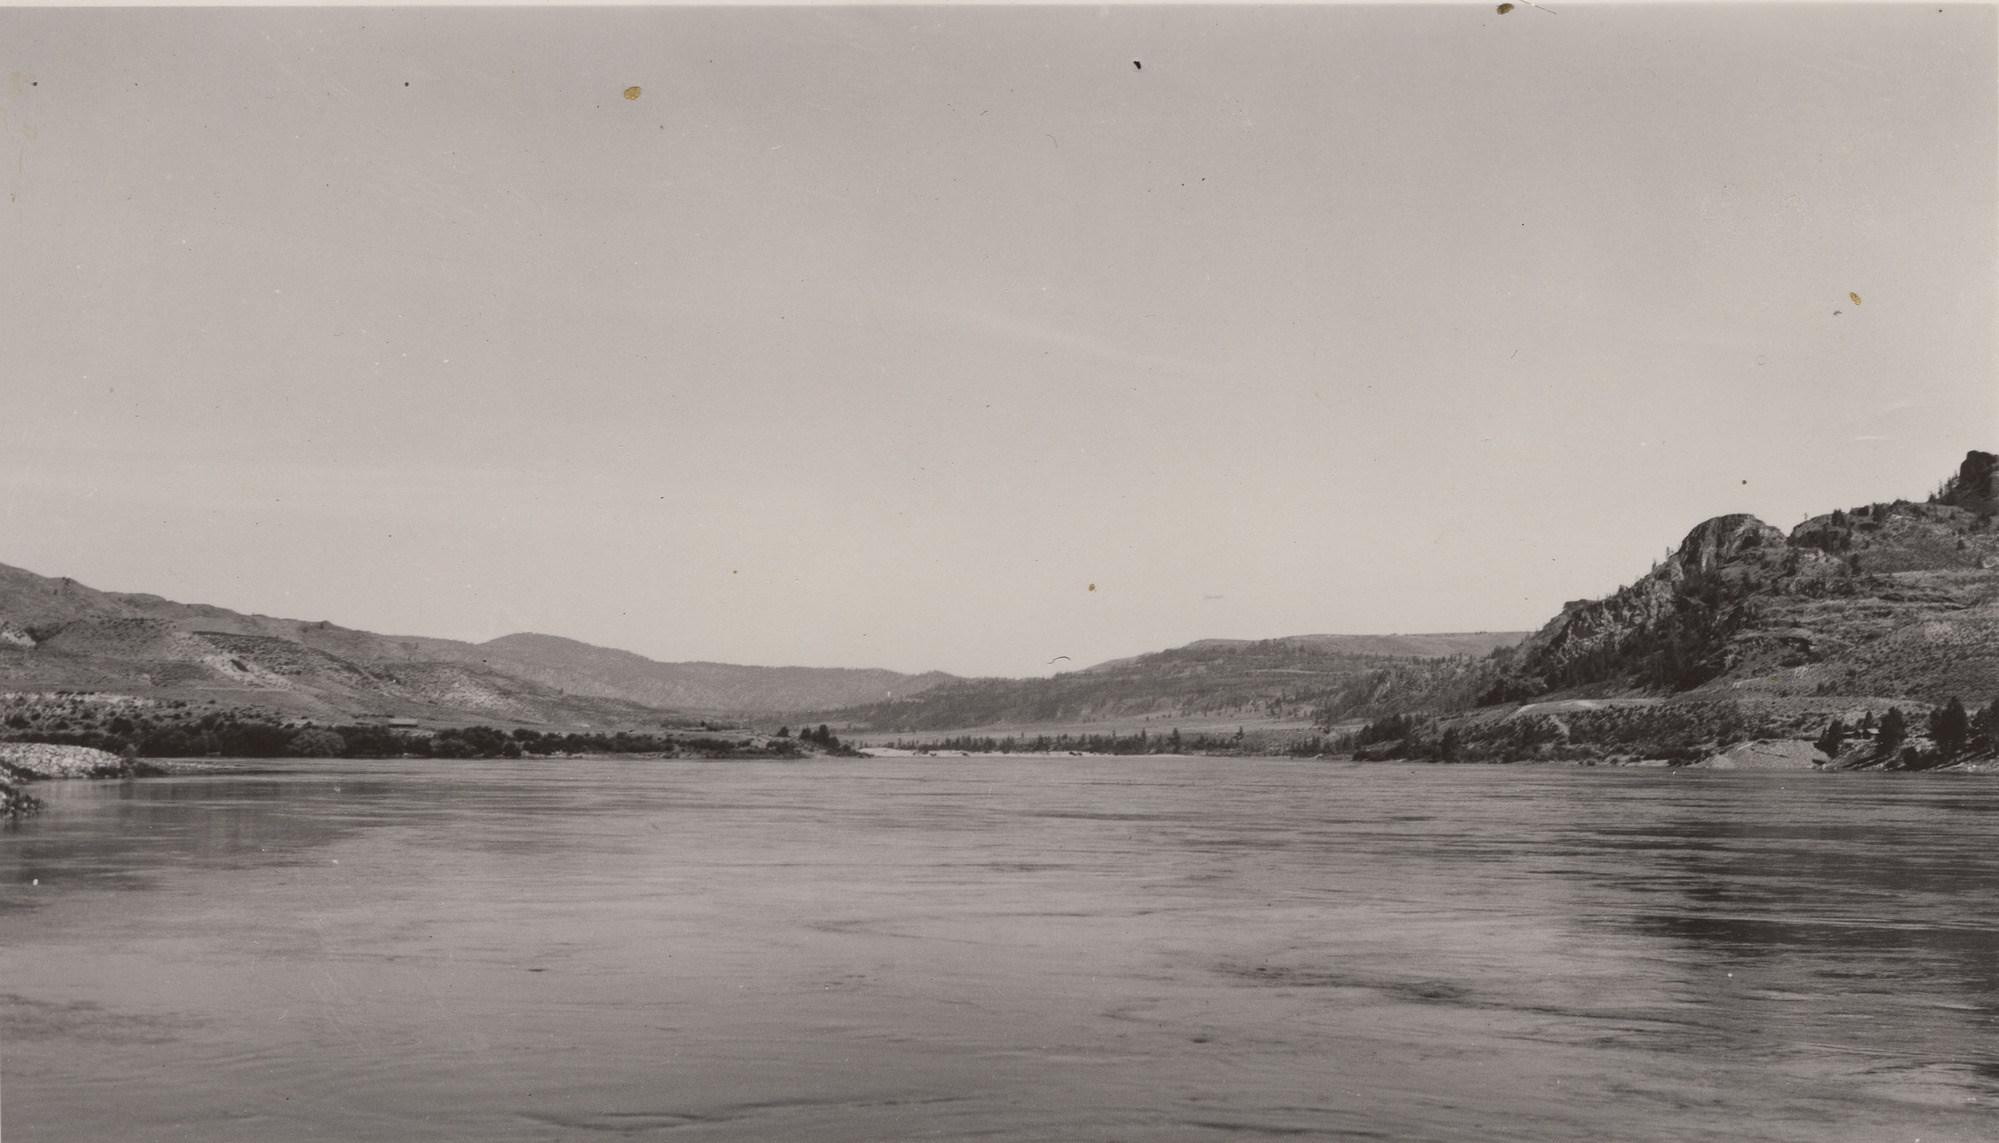 Black and white photograph taken looking across a large body of water, with rocky cliffs and gentle rolling hills in the distance